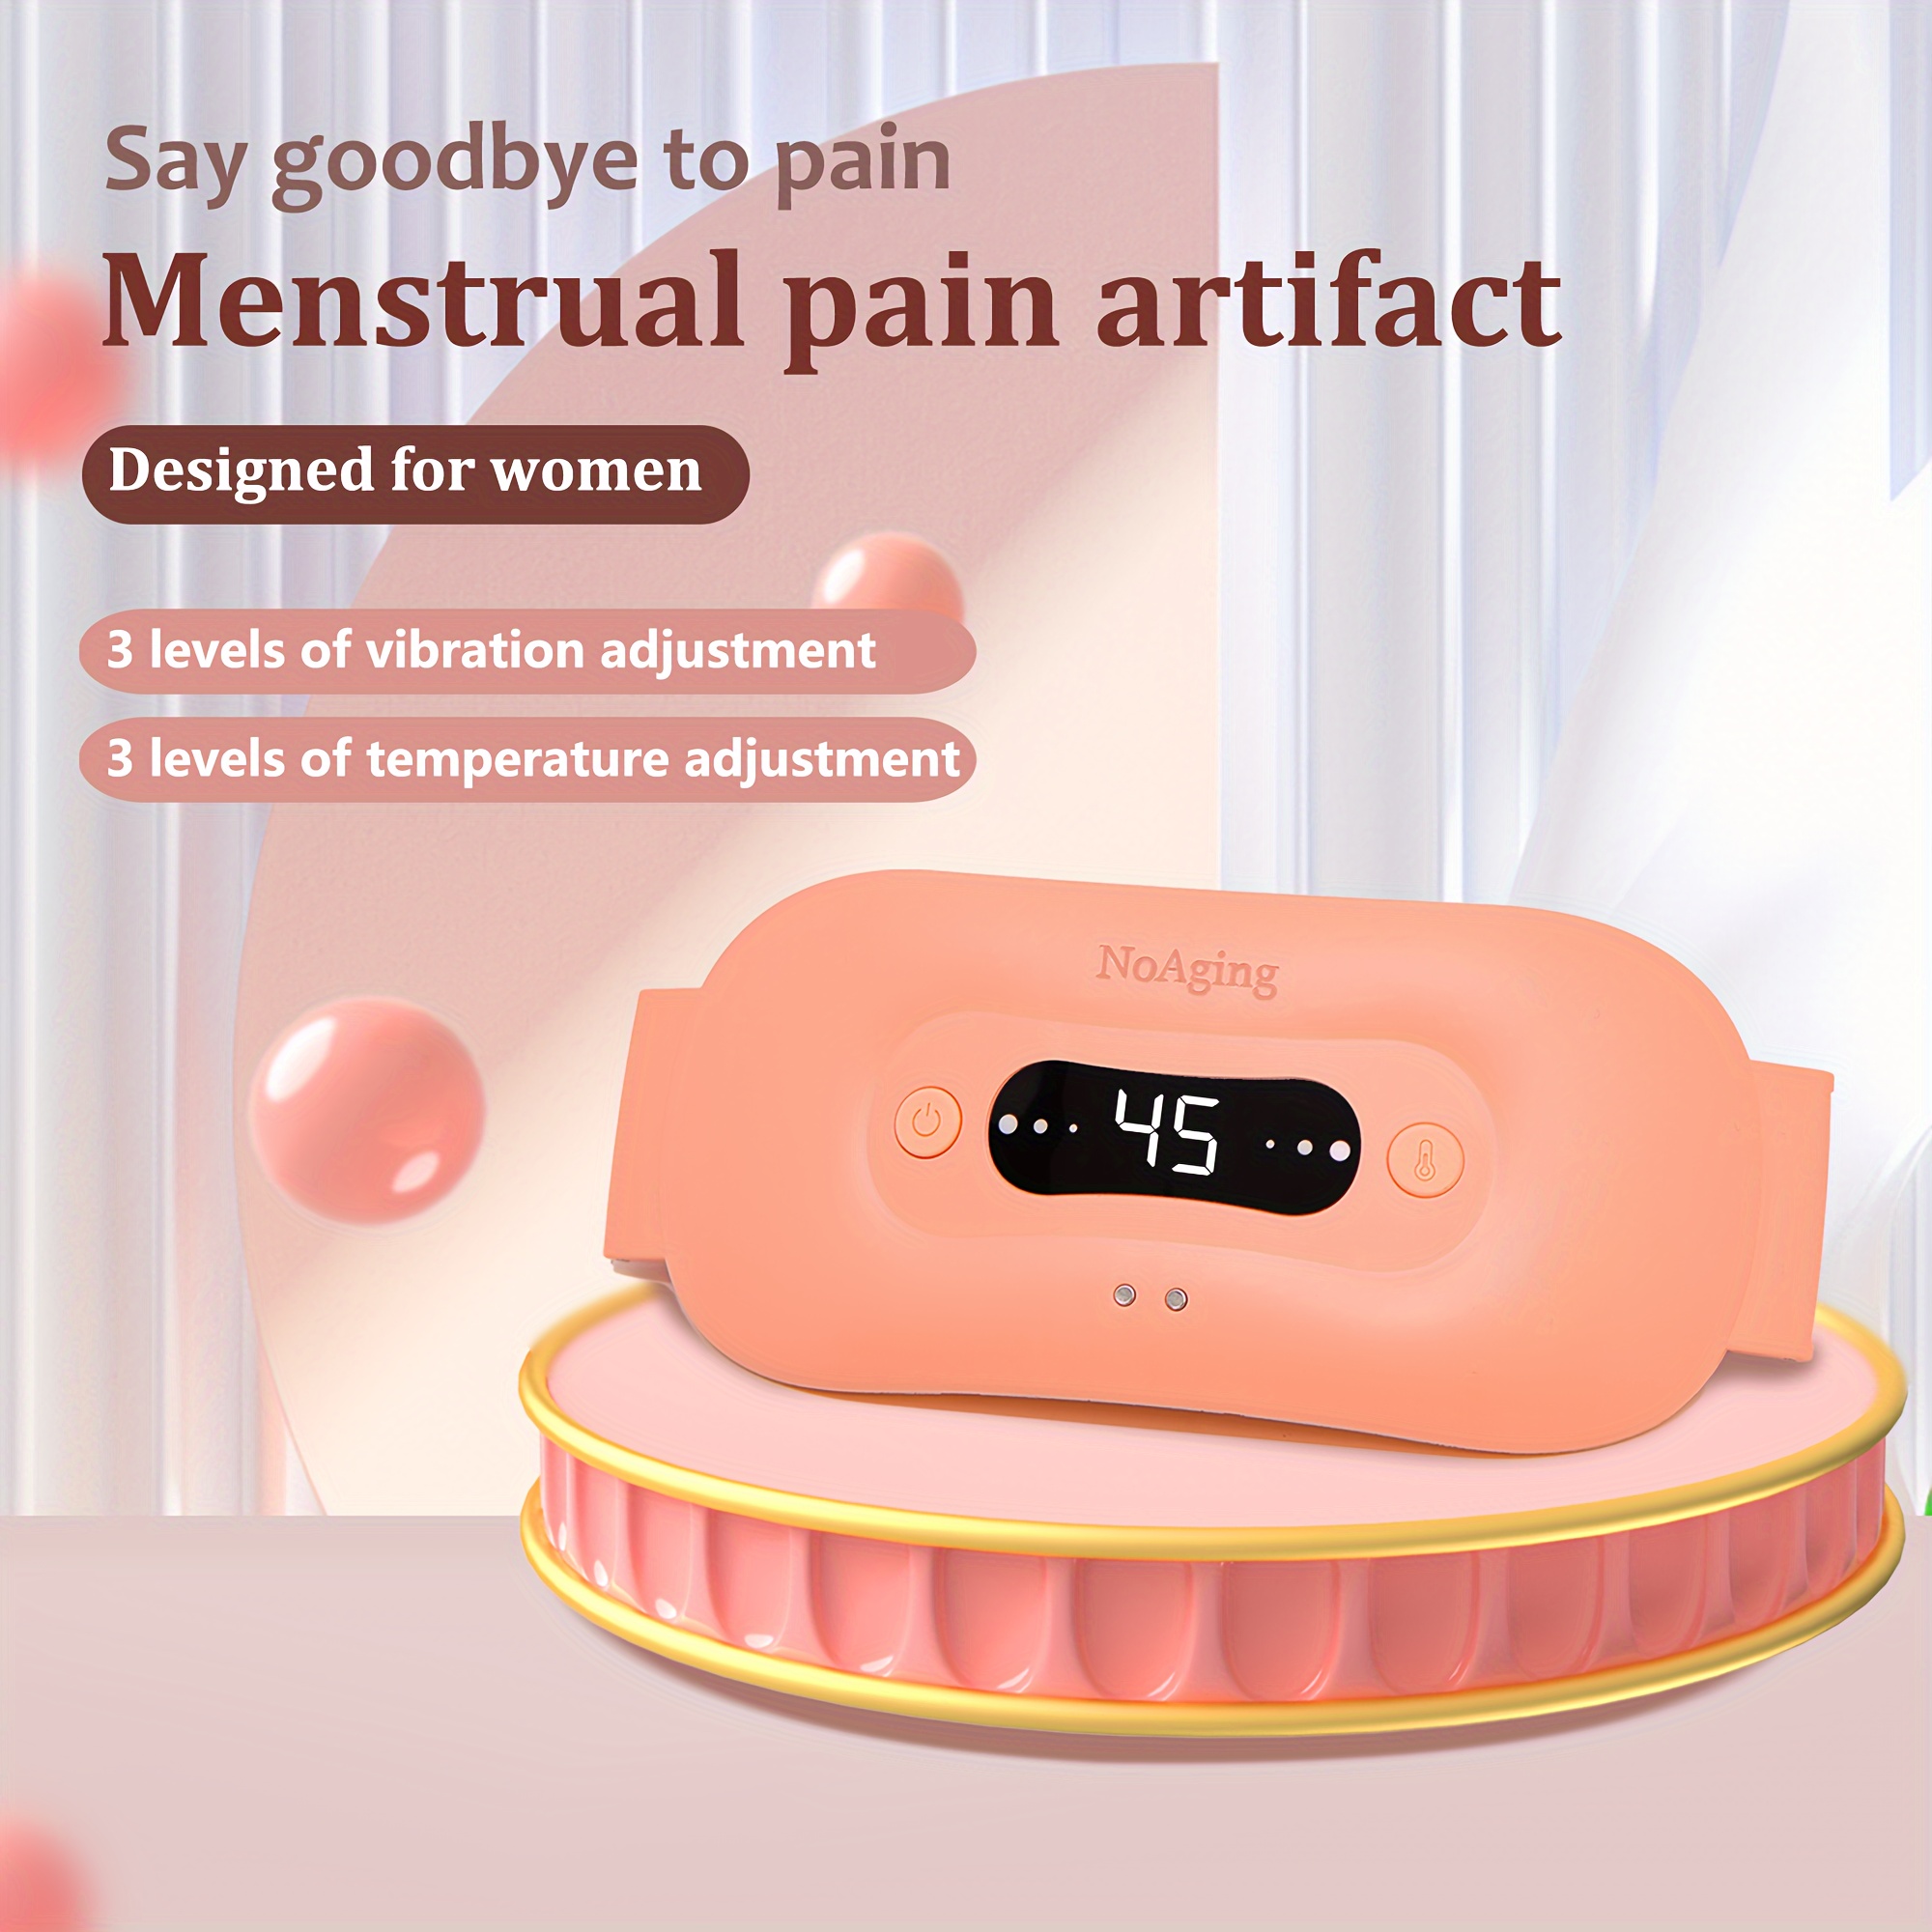 

New 7 Waterproof Vibration Heating Massage Belt, 3 Vibration Modes 3 Temperature Adjustmen, Soft Silicone Material Skin Friendly, Suitable For Abdomen, Waist And Legs, Pink